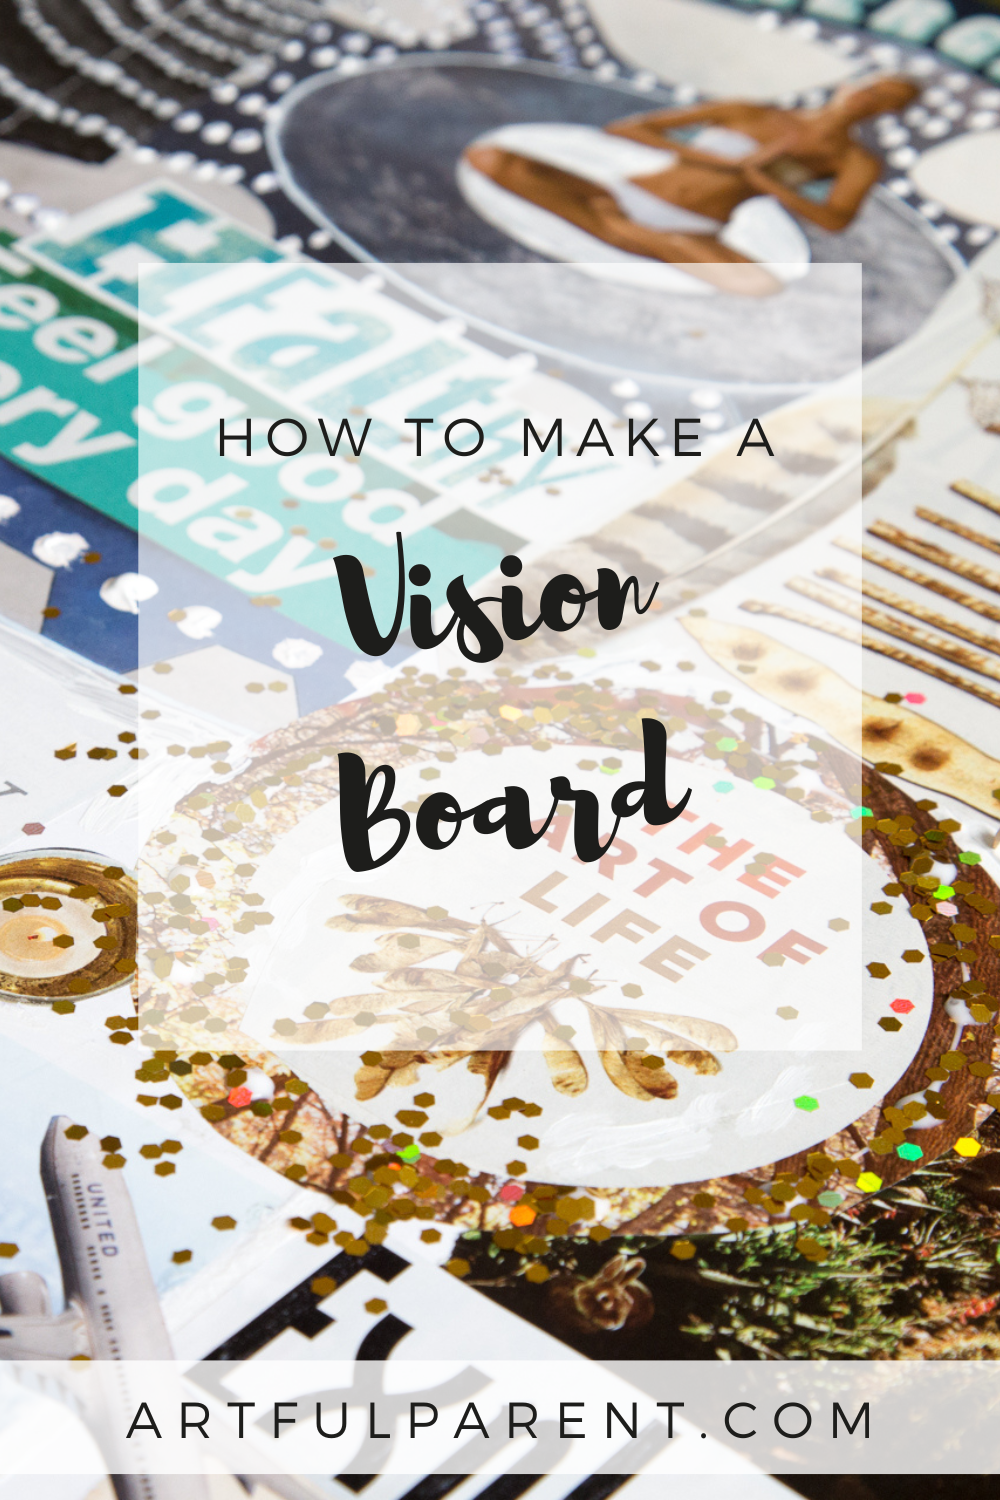 How to Make a Vision Board That Works in 9 Simple Steps